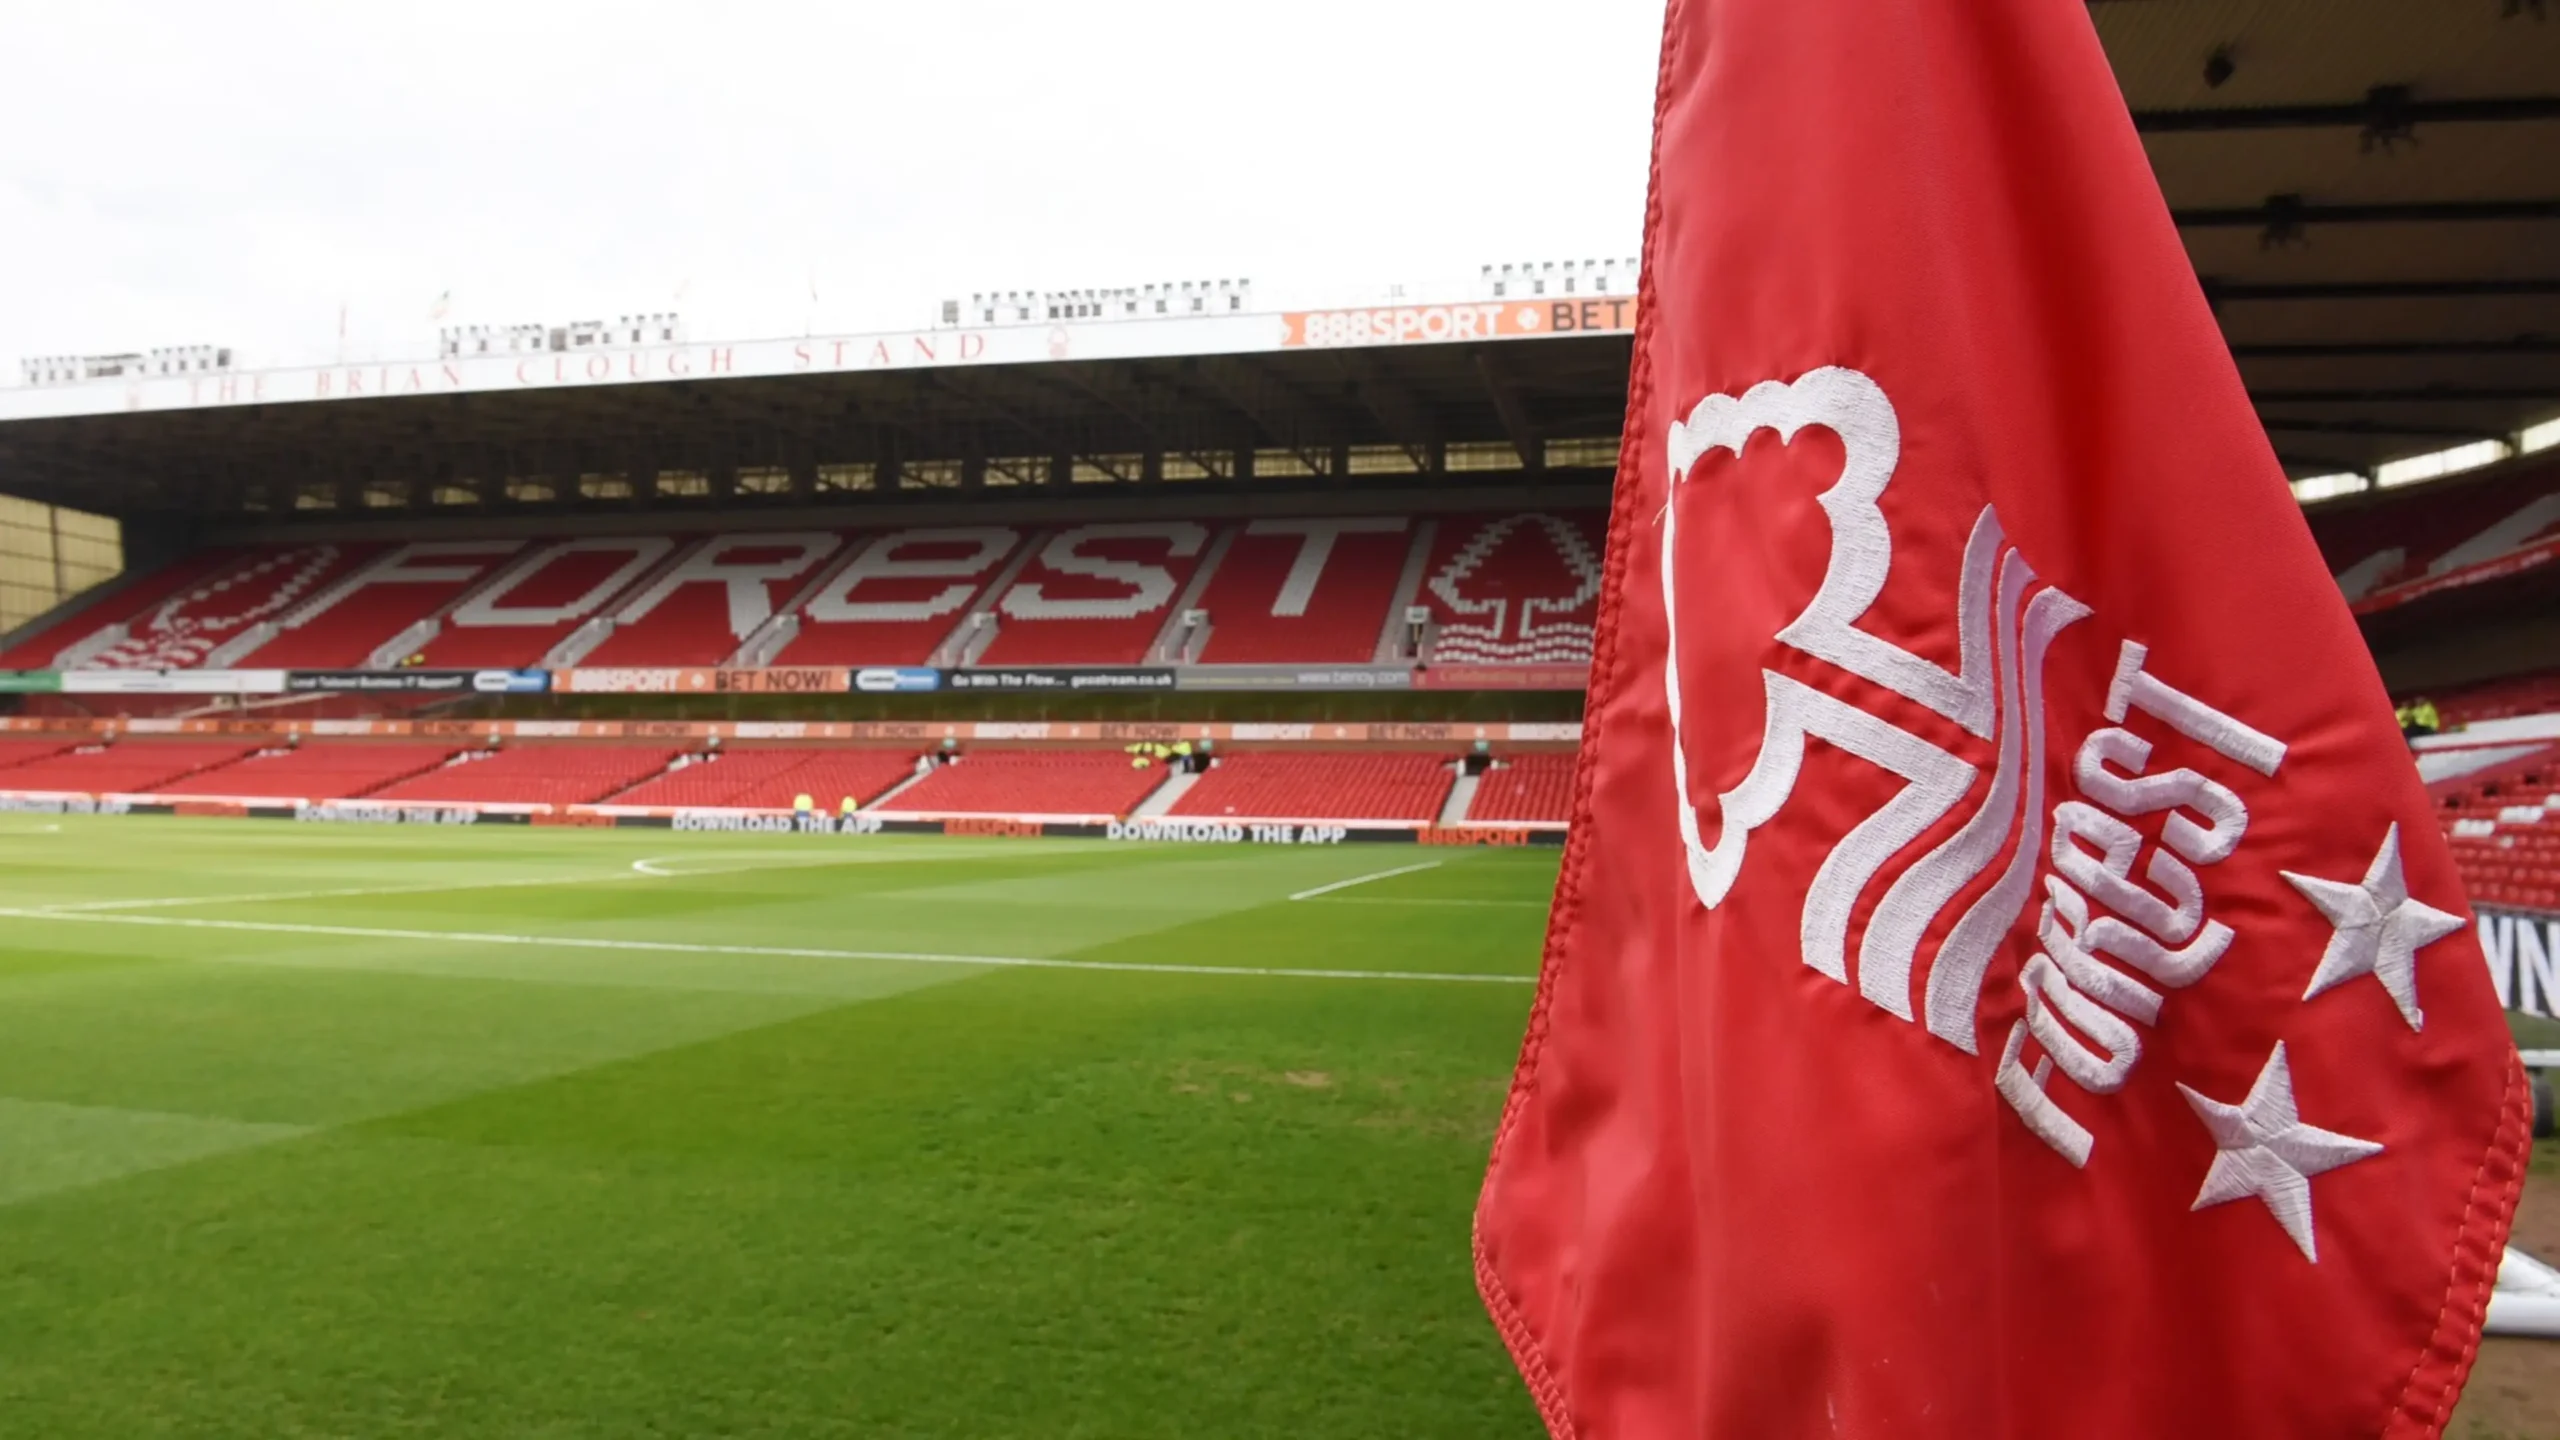 BBC report: Nottingham Forest goalkeeper admitted he’s was ‘glad VAR didn’t intervene’ after the mistake against Brentford….